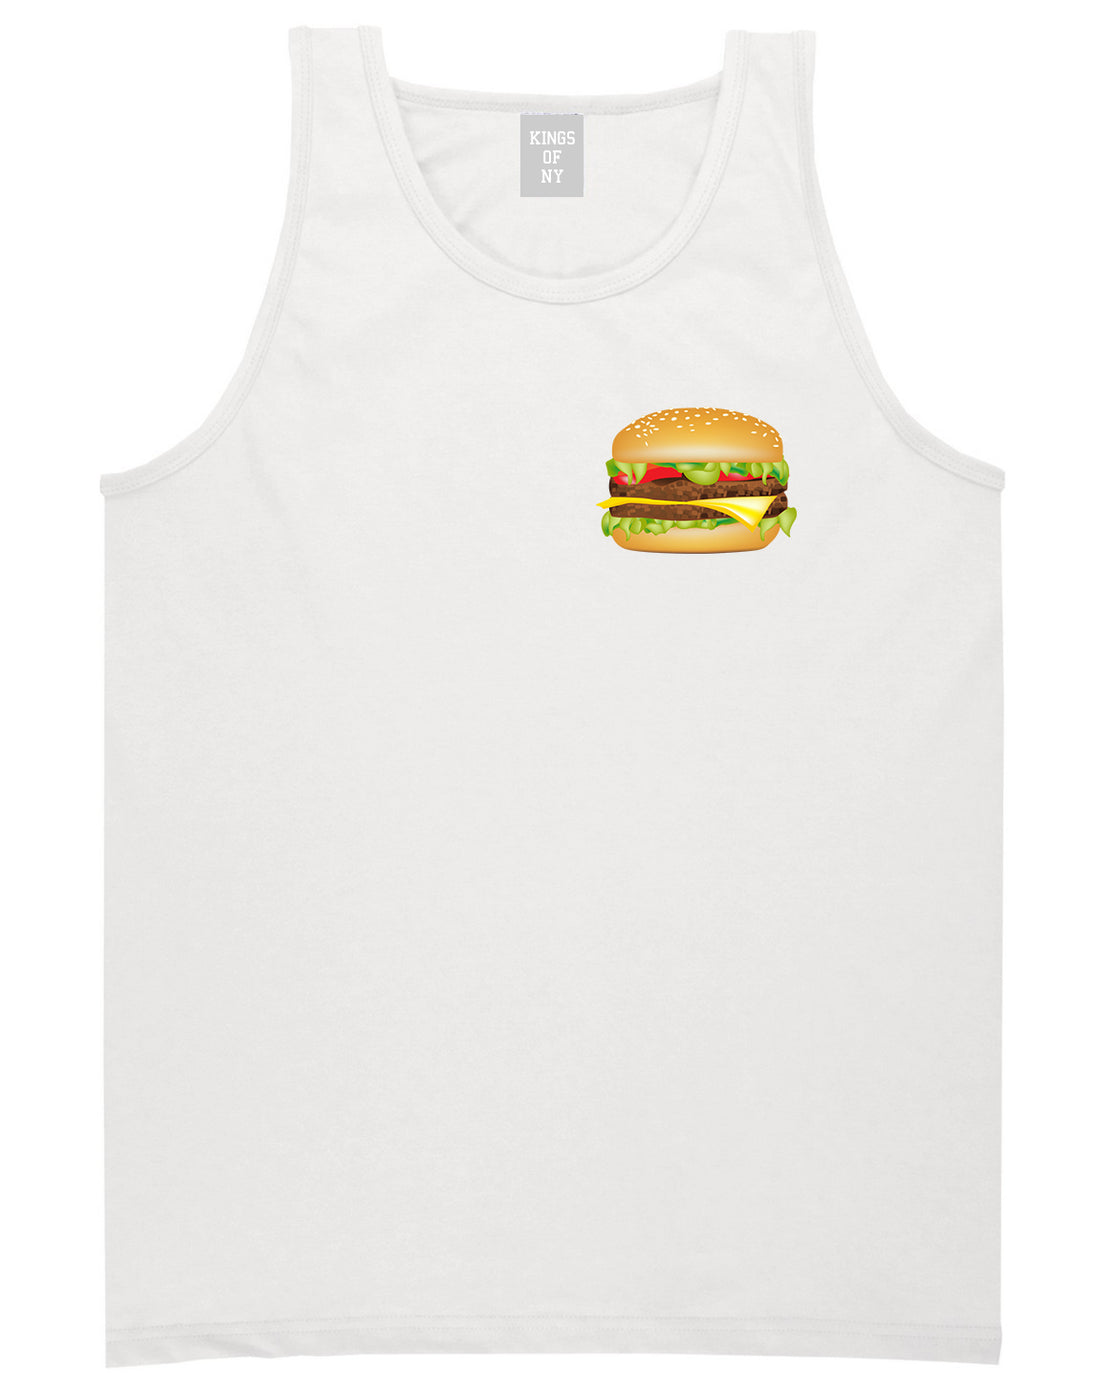 Burger Chest White Tank Top Shirt by Kings Of NY